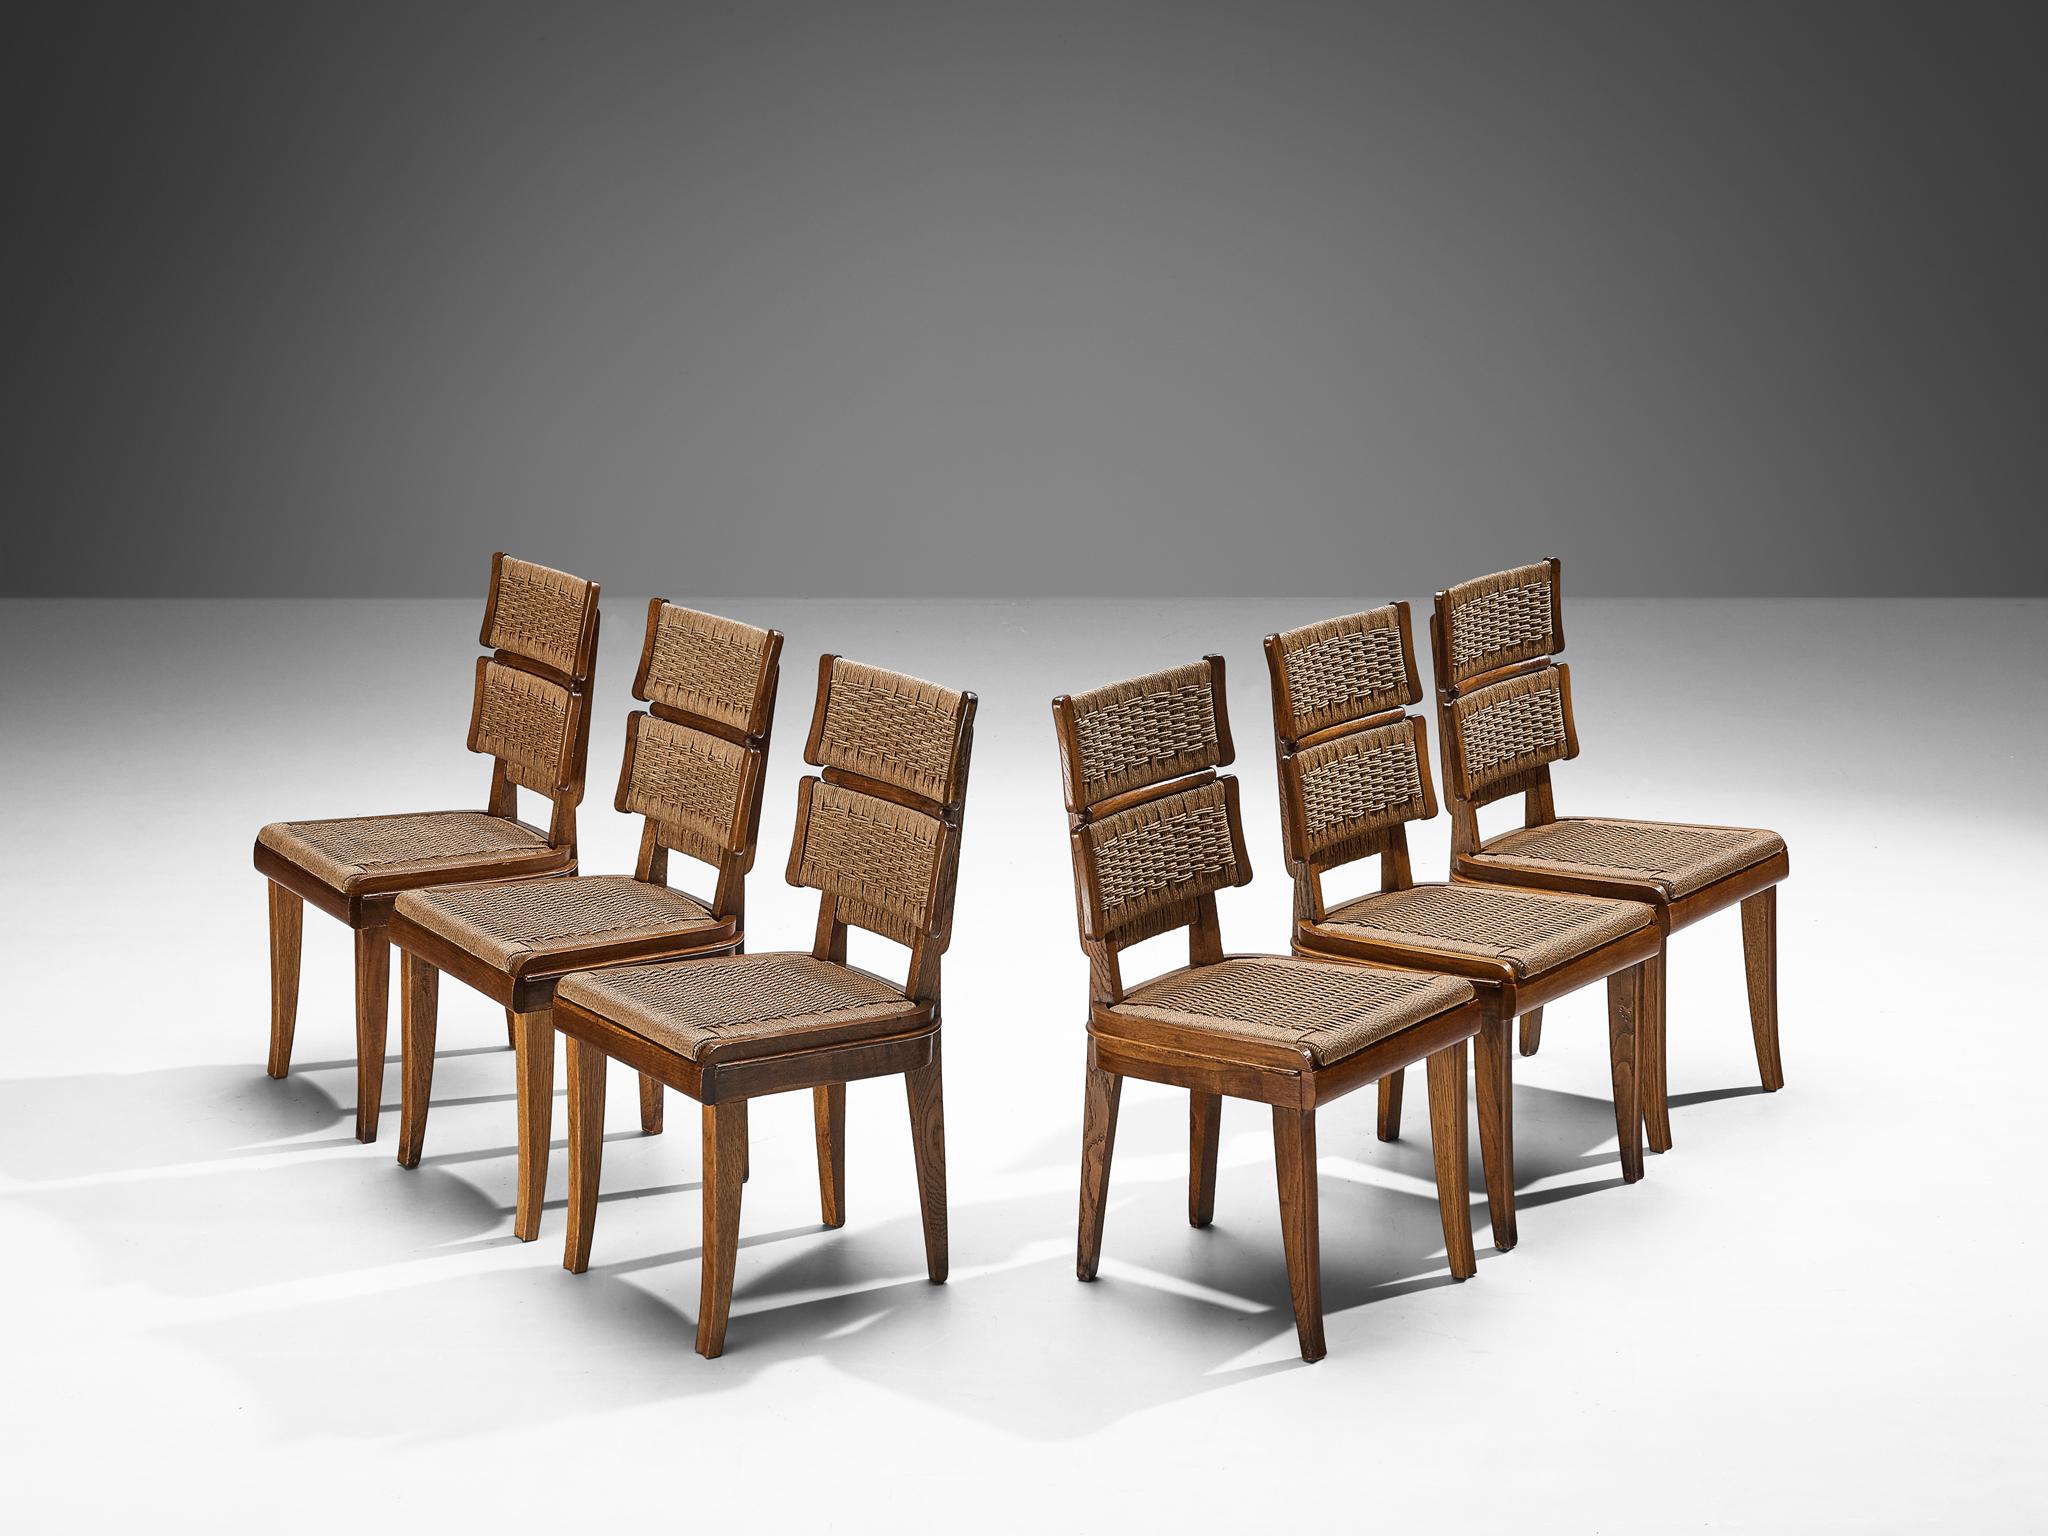 Set of six dining chairs, oak, papercord, Italy, circa 1935 

The exceptional quality of craftsmanship and precise attention to detail exhibited in this set of dining chairs suggests the work of a prominent Italian designer in the field of